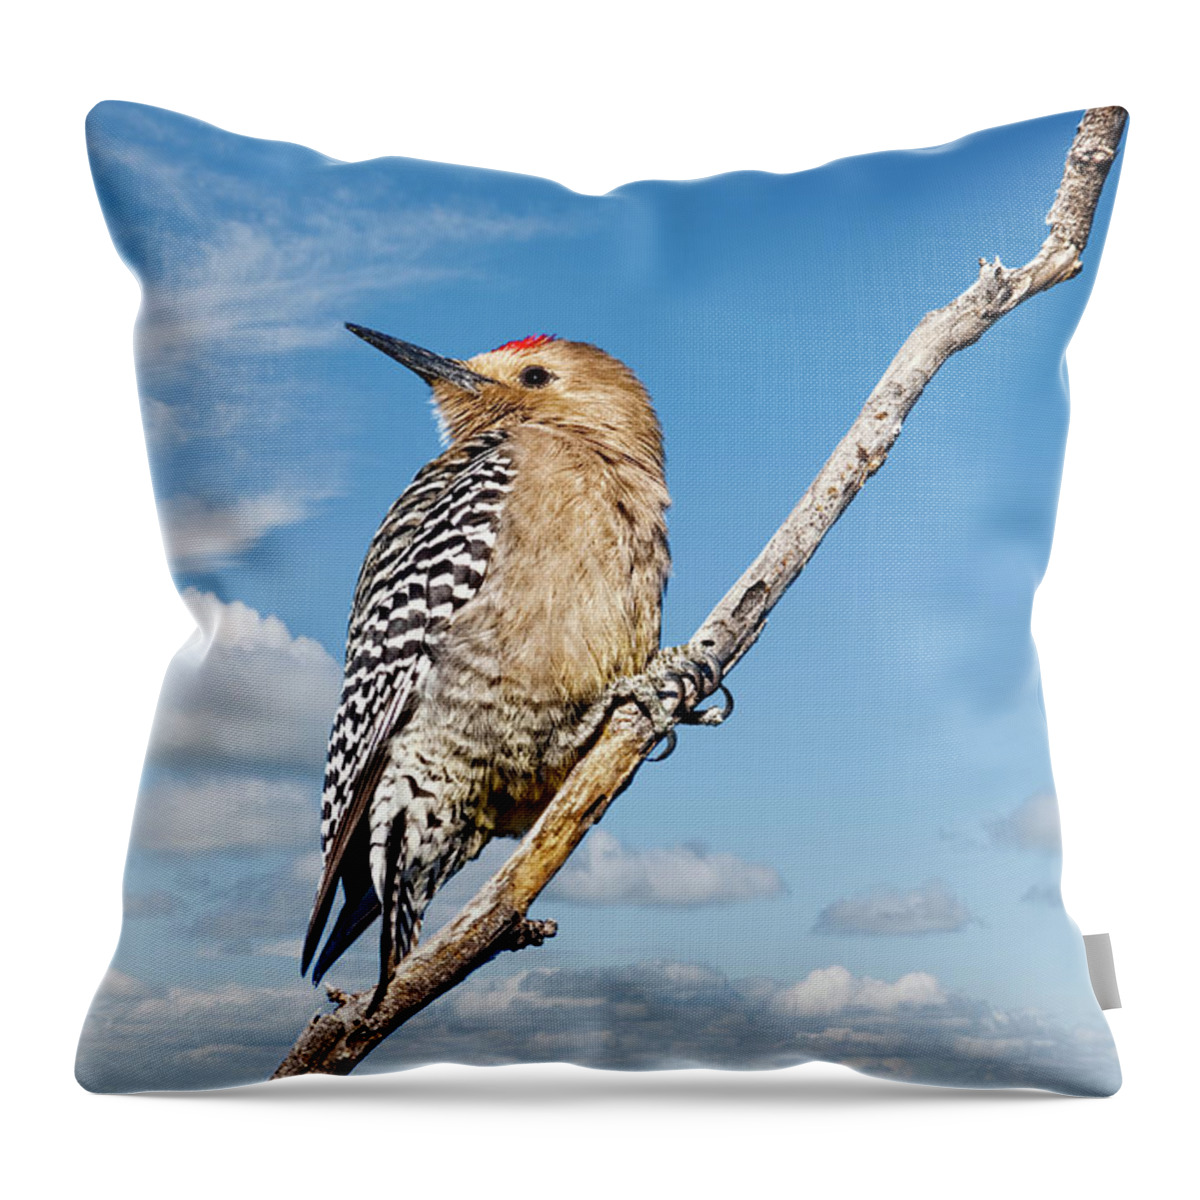 Animal Throw Pillow featuring the photograph Male Gila Woodpecker by Jeff Goulden